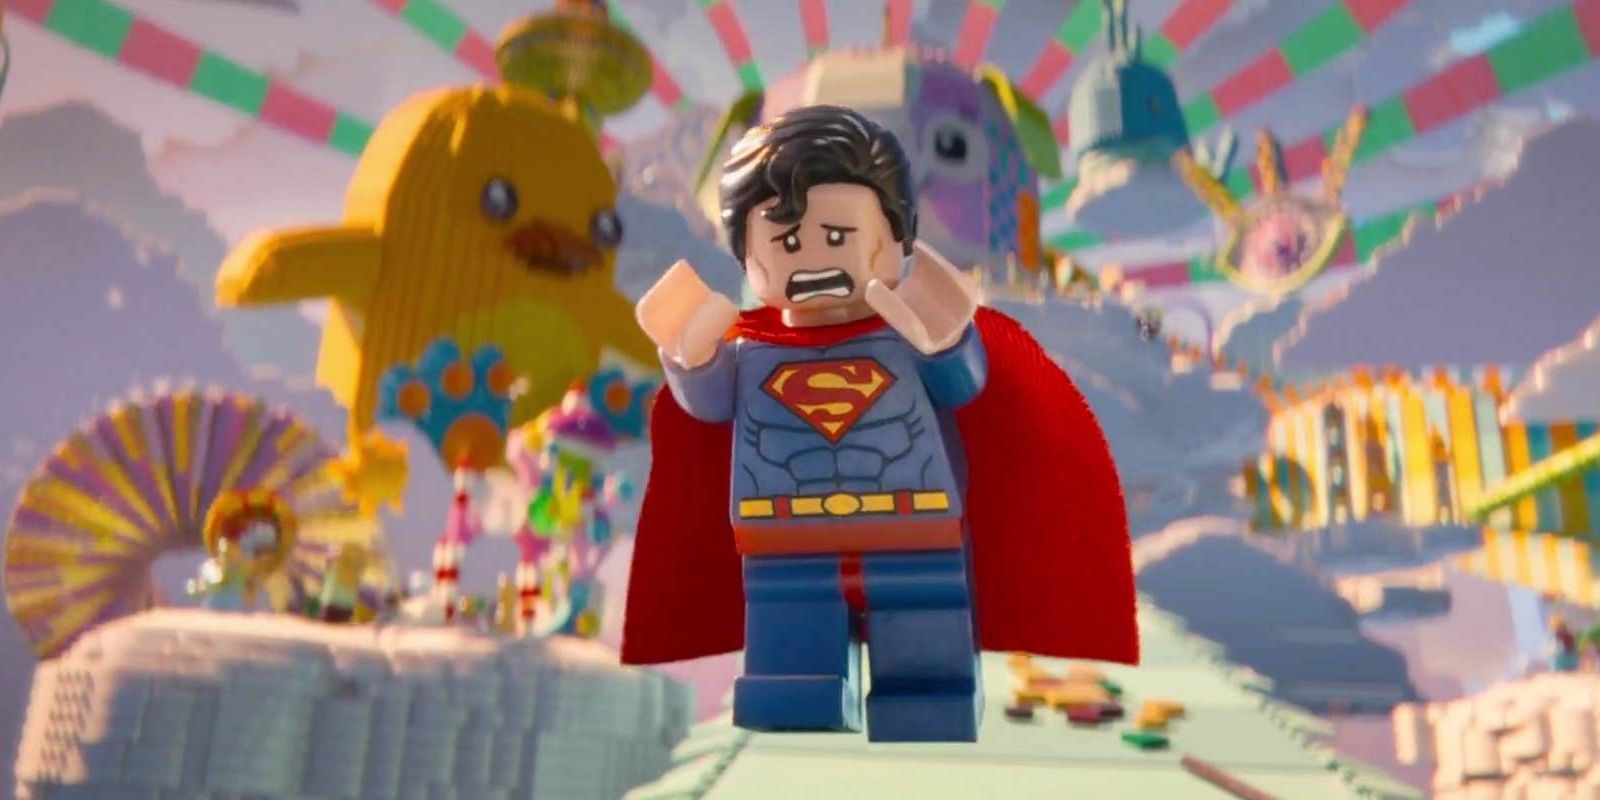 Superman crying in The LEGO Movie Cropped